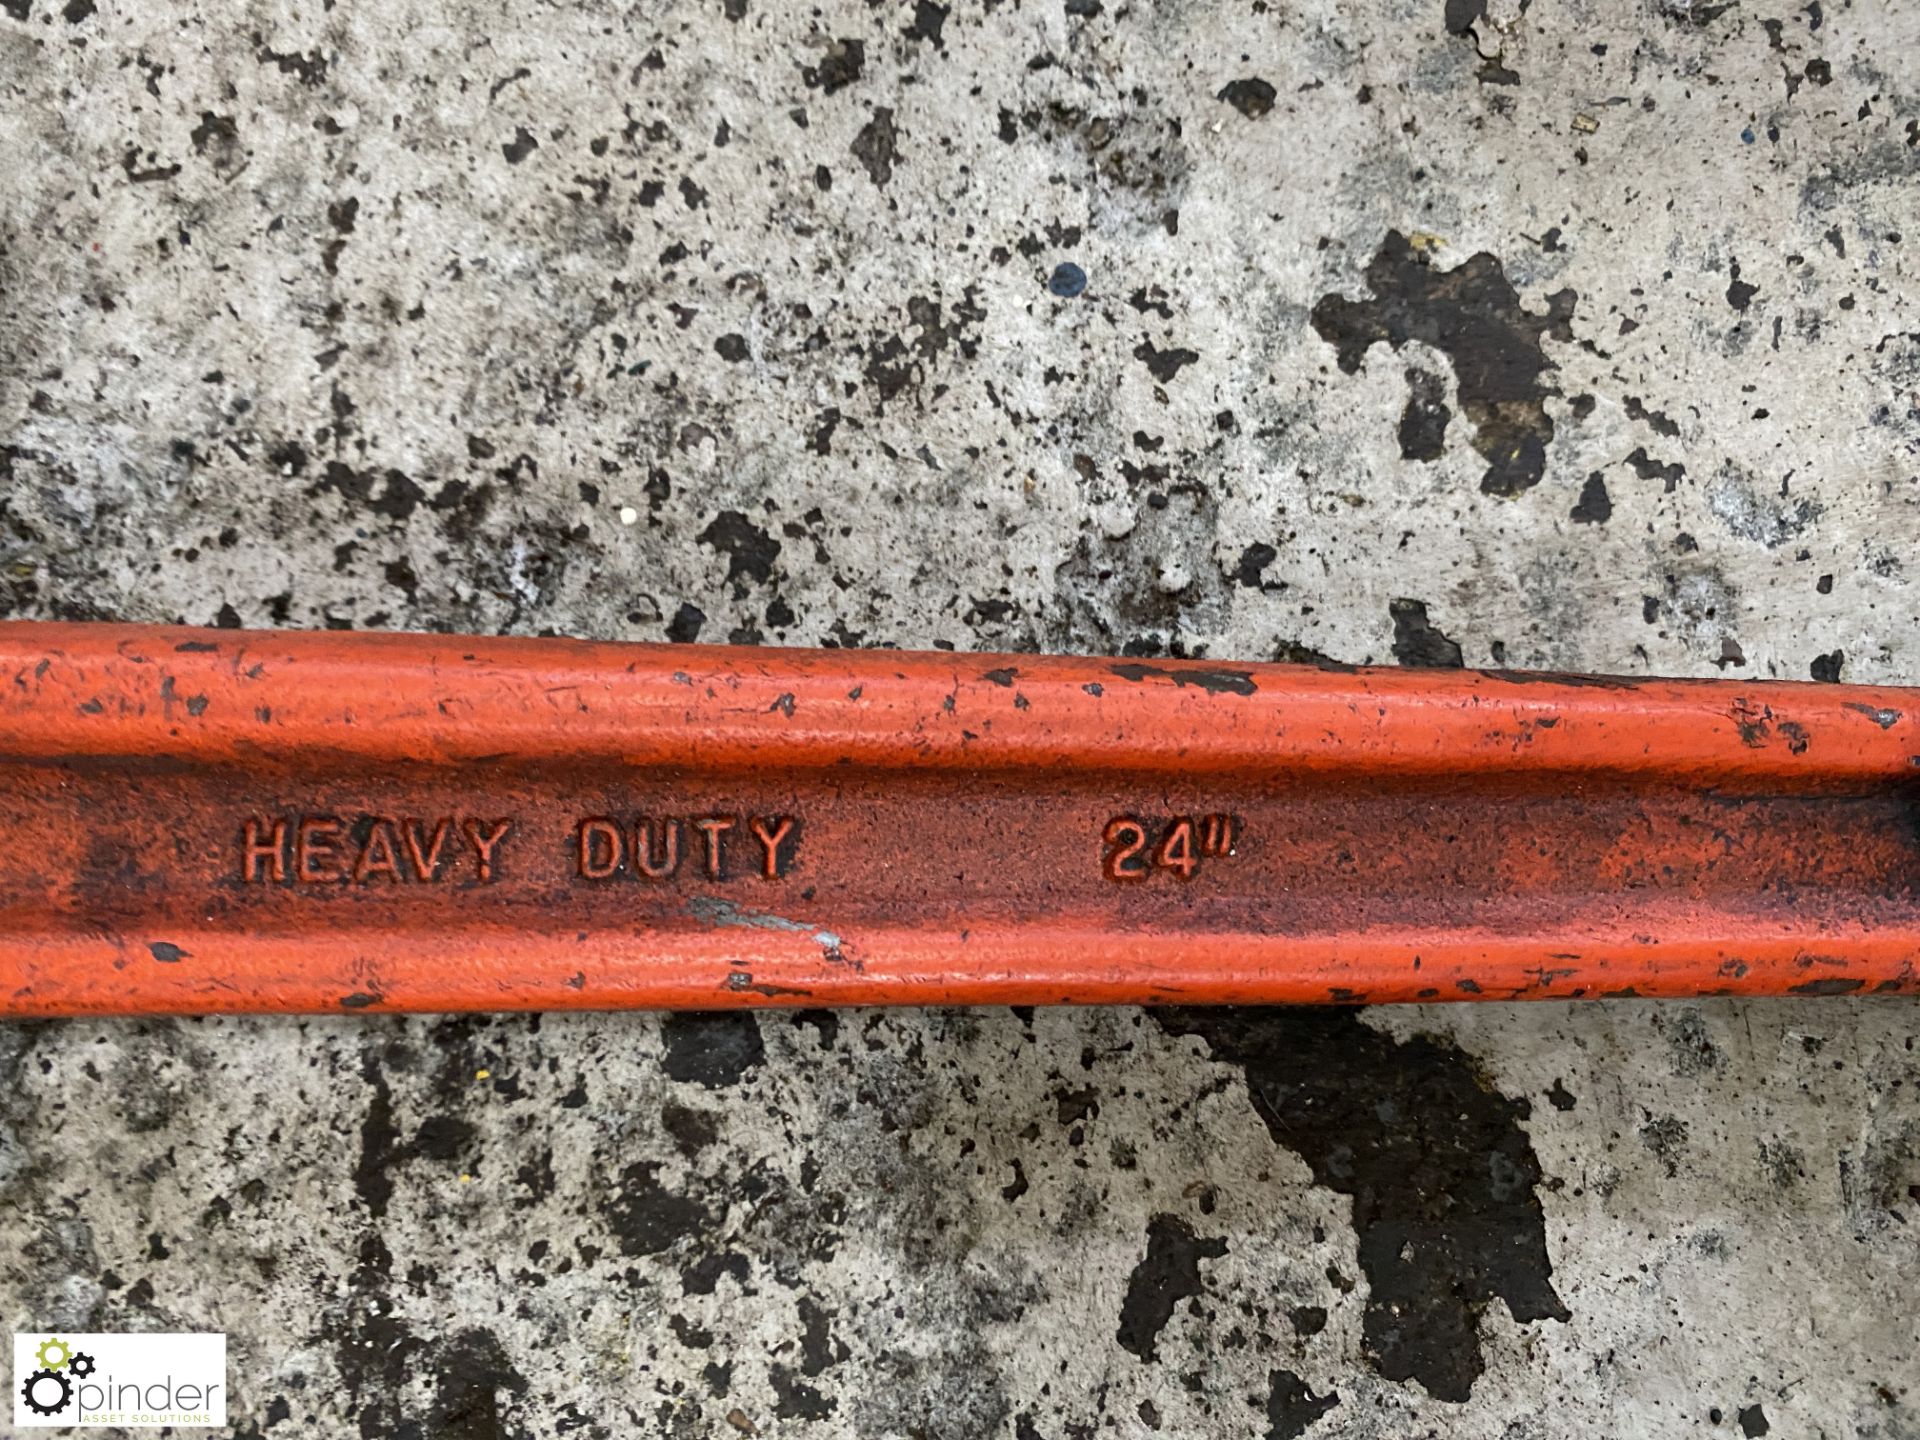 Ridgid Pipe Wrench, 24in - Image 2 of 3